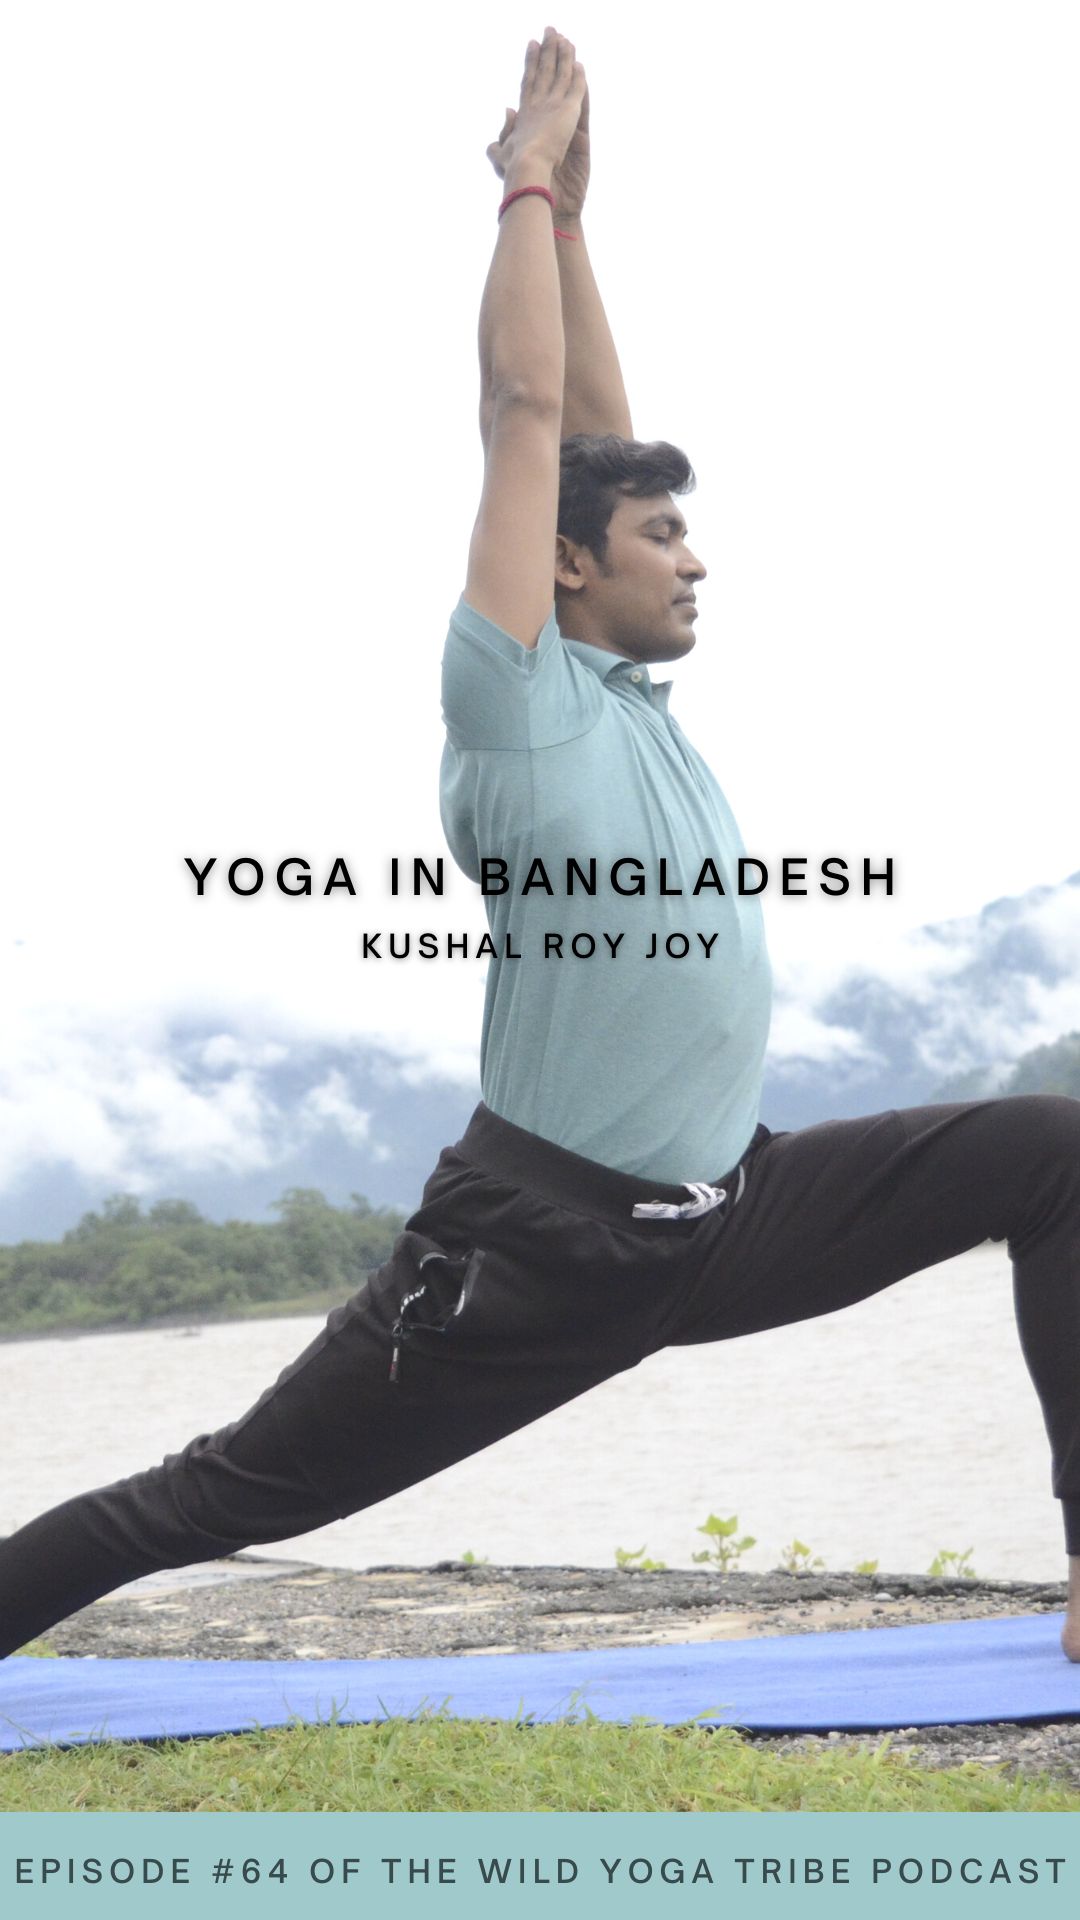 Yoga for the Joy of It!